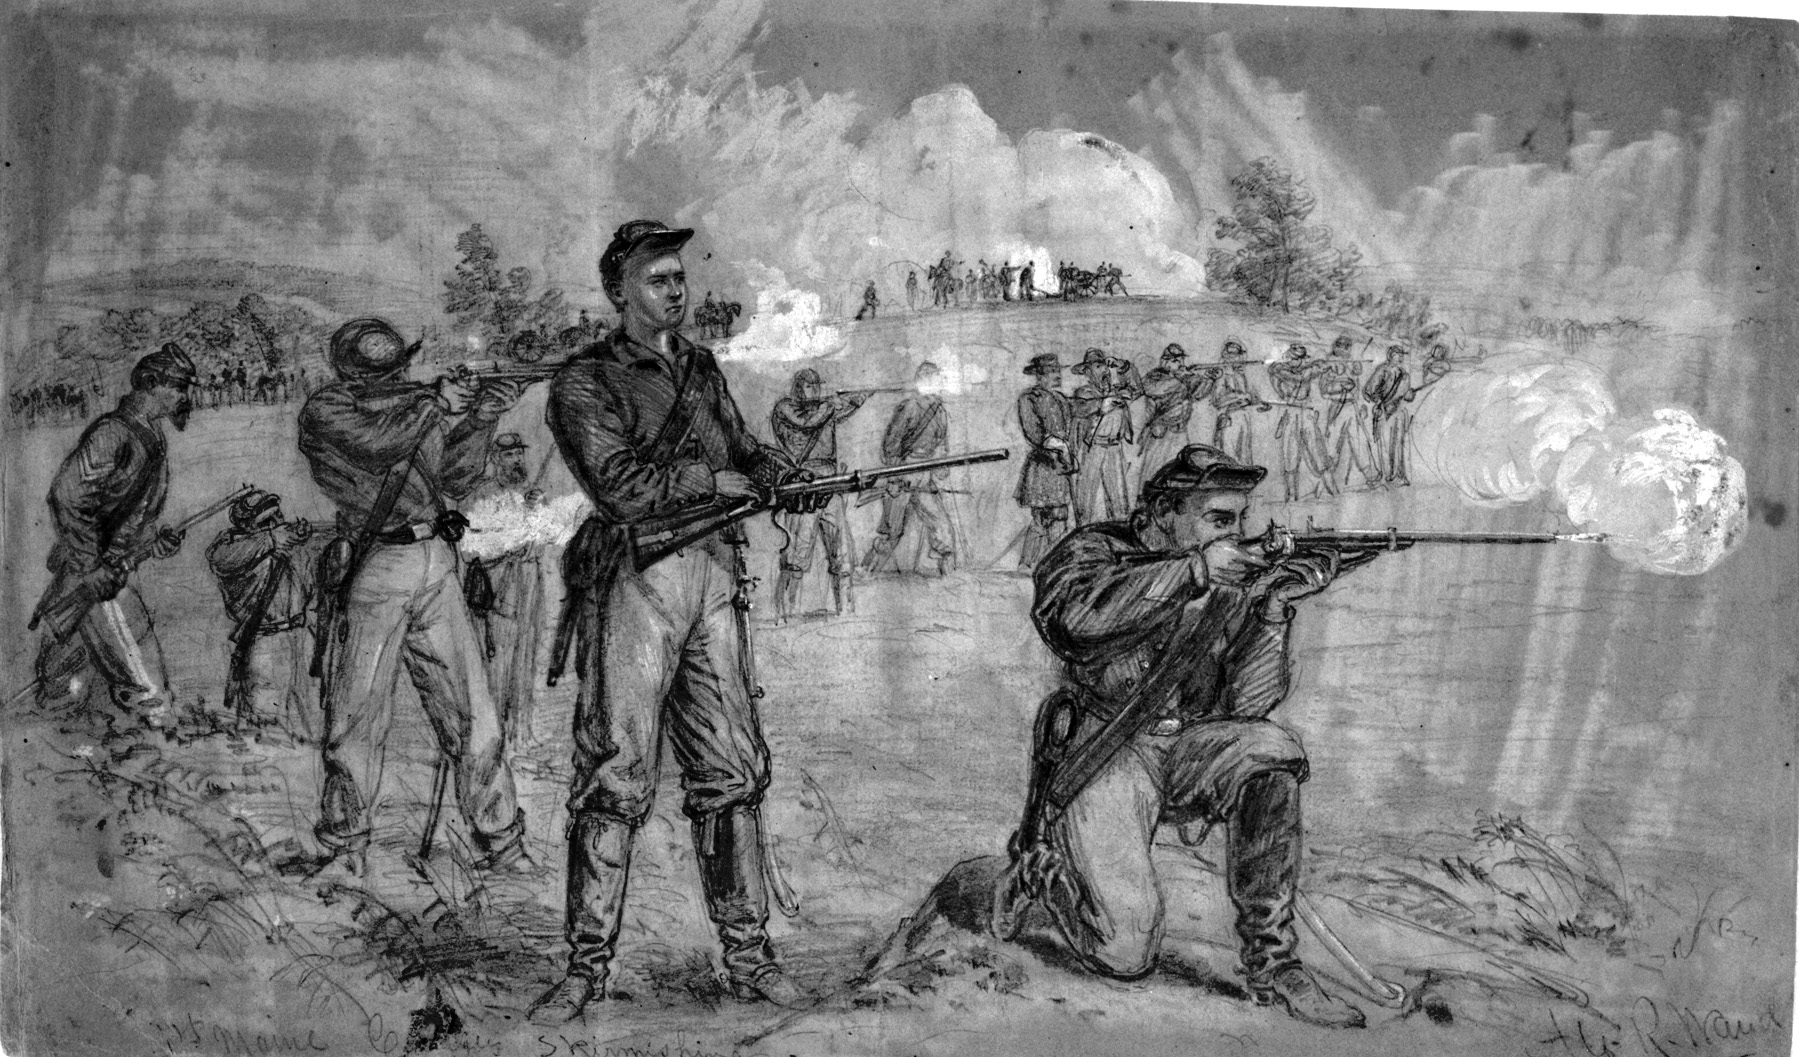 Dismounted troopers from the 1st Maine Cavalry of Colonel Judson Kilpatrick’s First Brigade of Brig. Gen. David Gregg’s Third Division form a skirmish line on the Union left flank. The 1st Maine hit the 6th Virginia Cavalry hard in the flank before Confederate reinforcements appeared forcing Gregg’s Division to retire. 